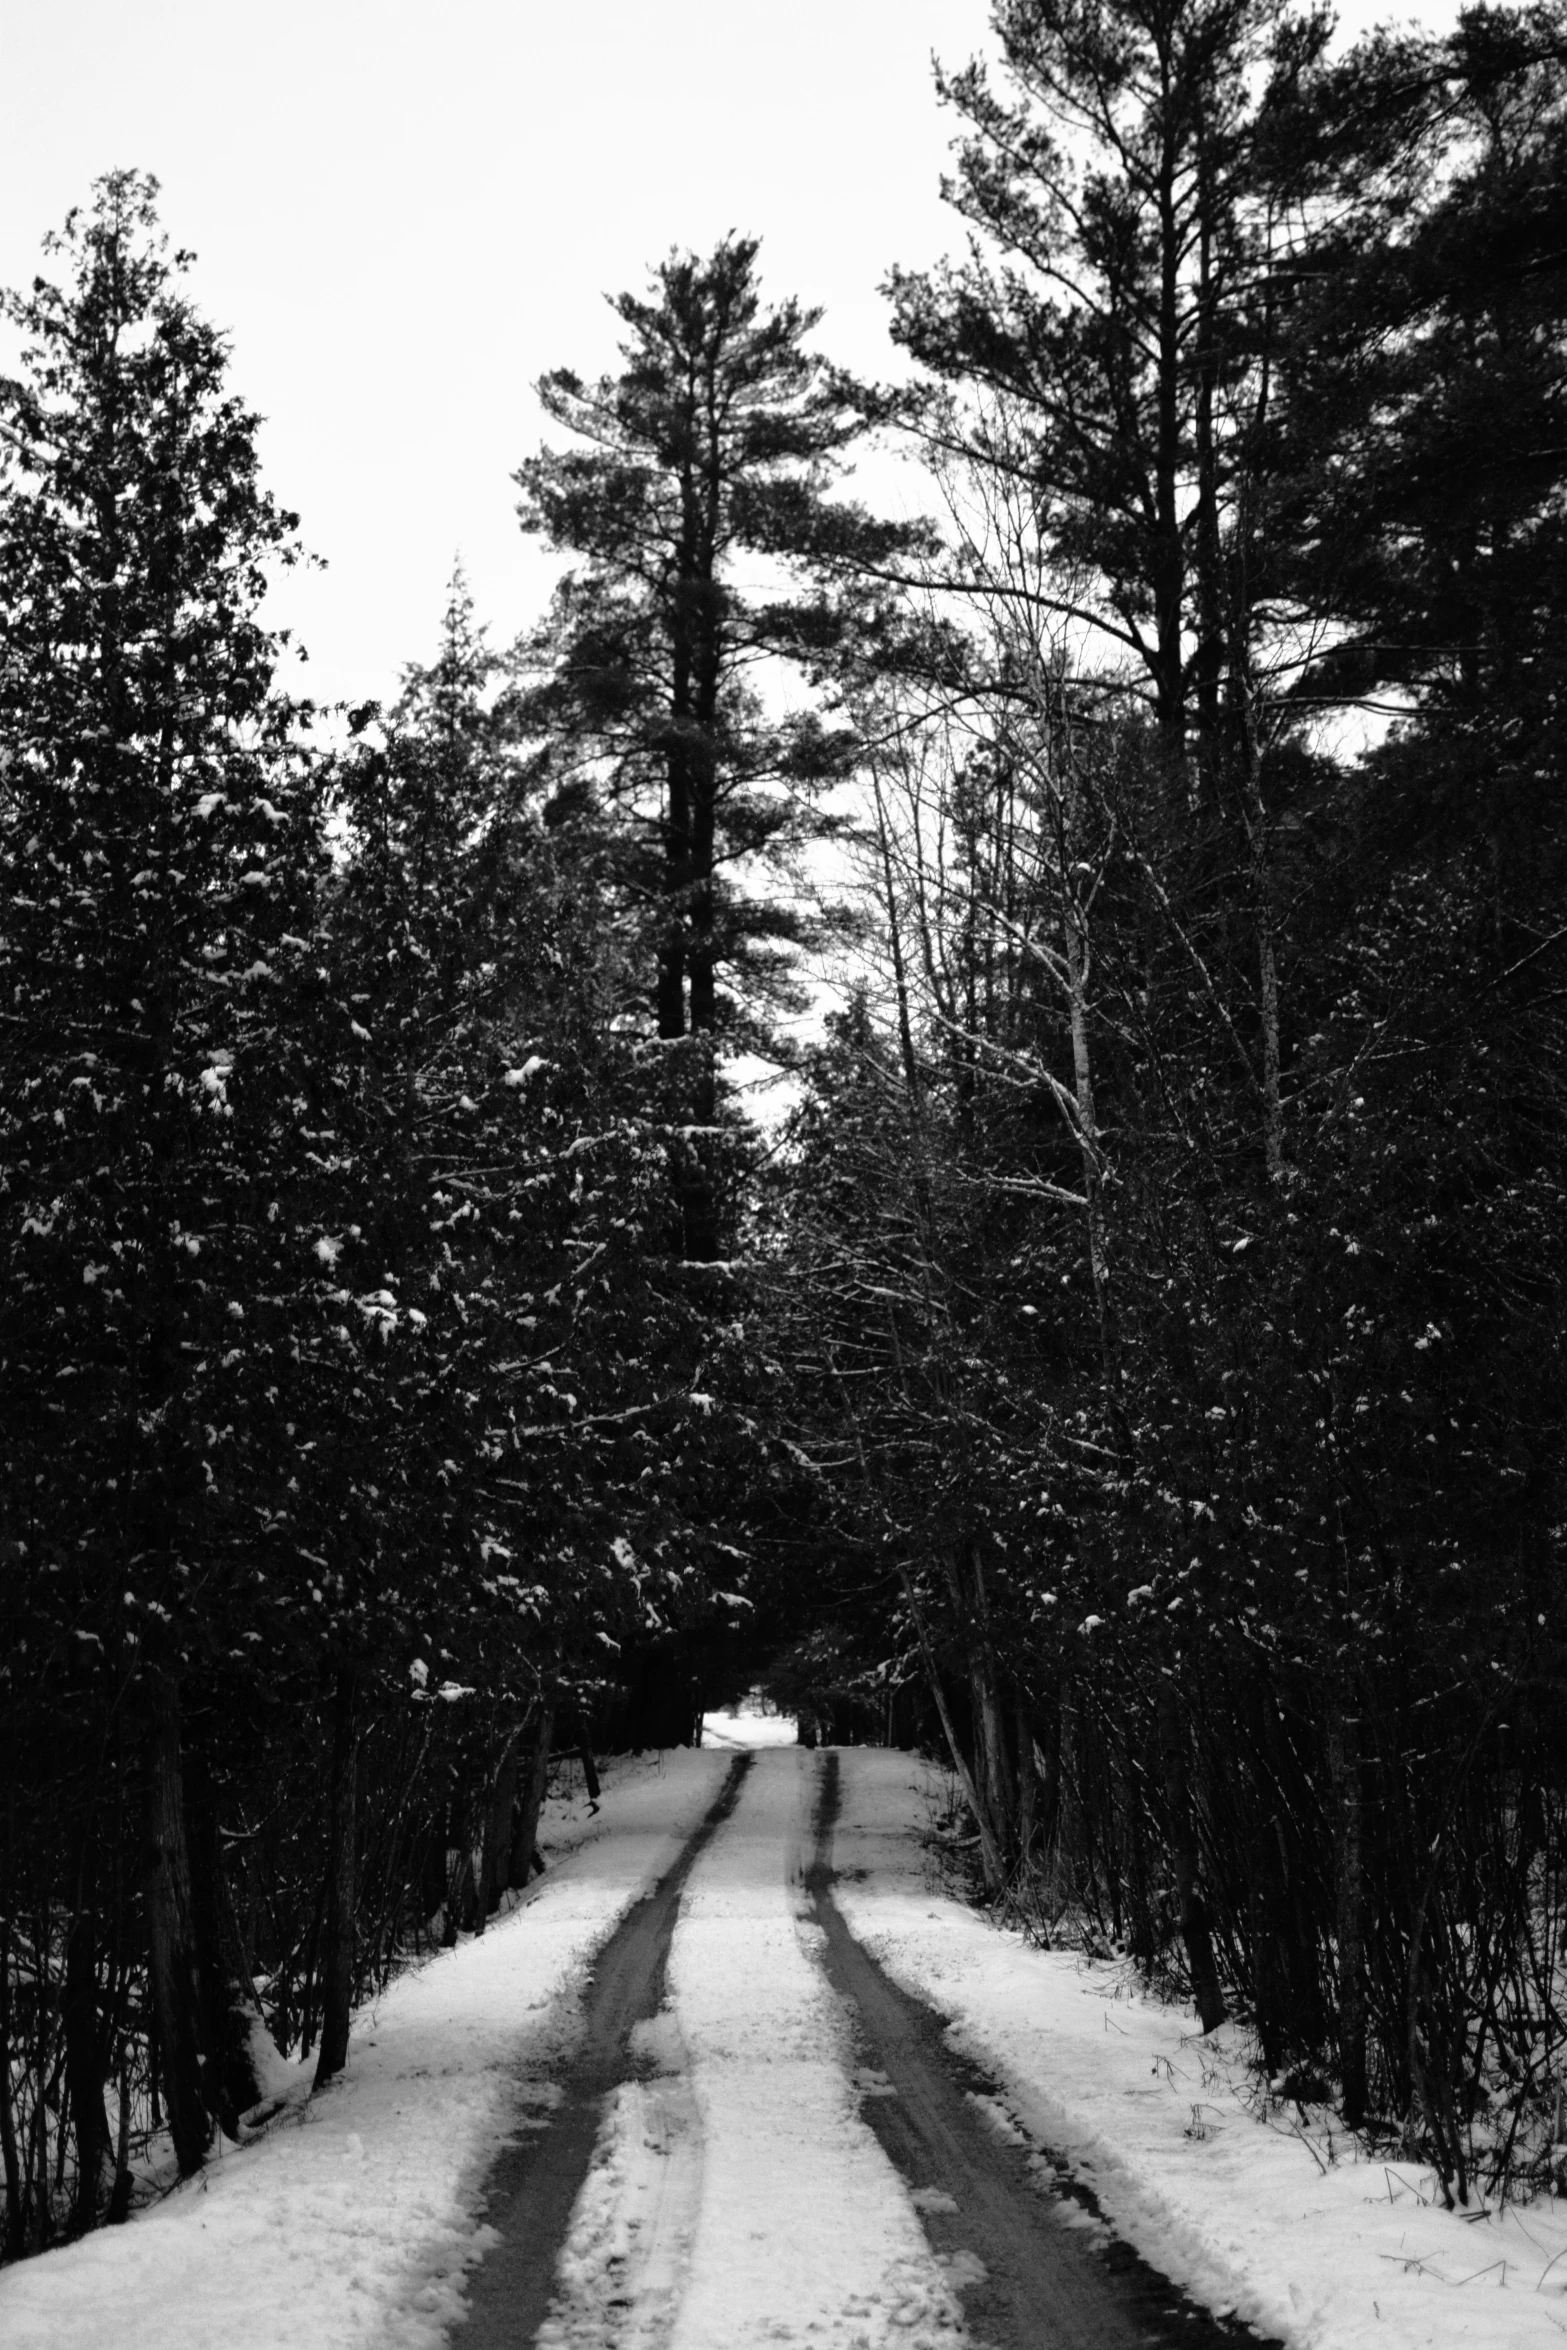 two people walk down a snow - covered road in the forest